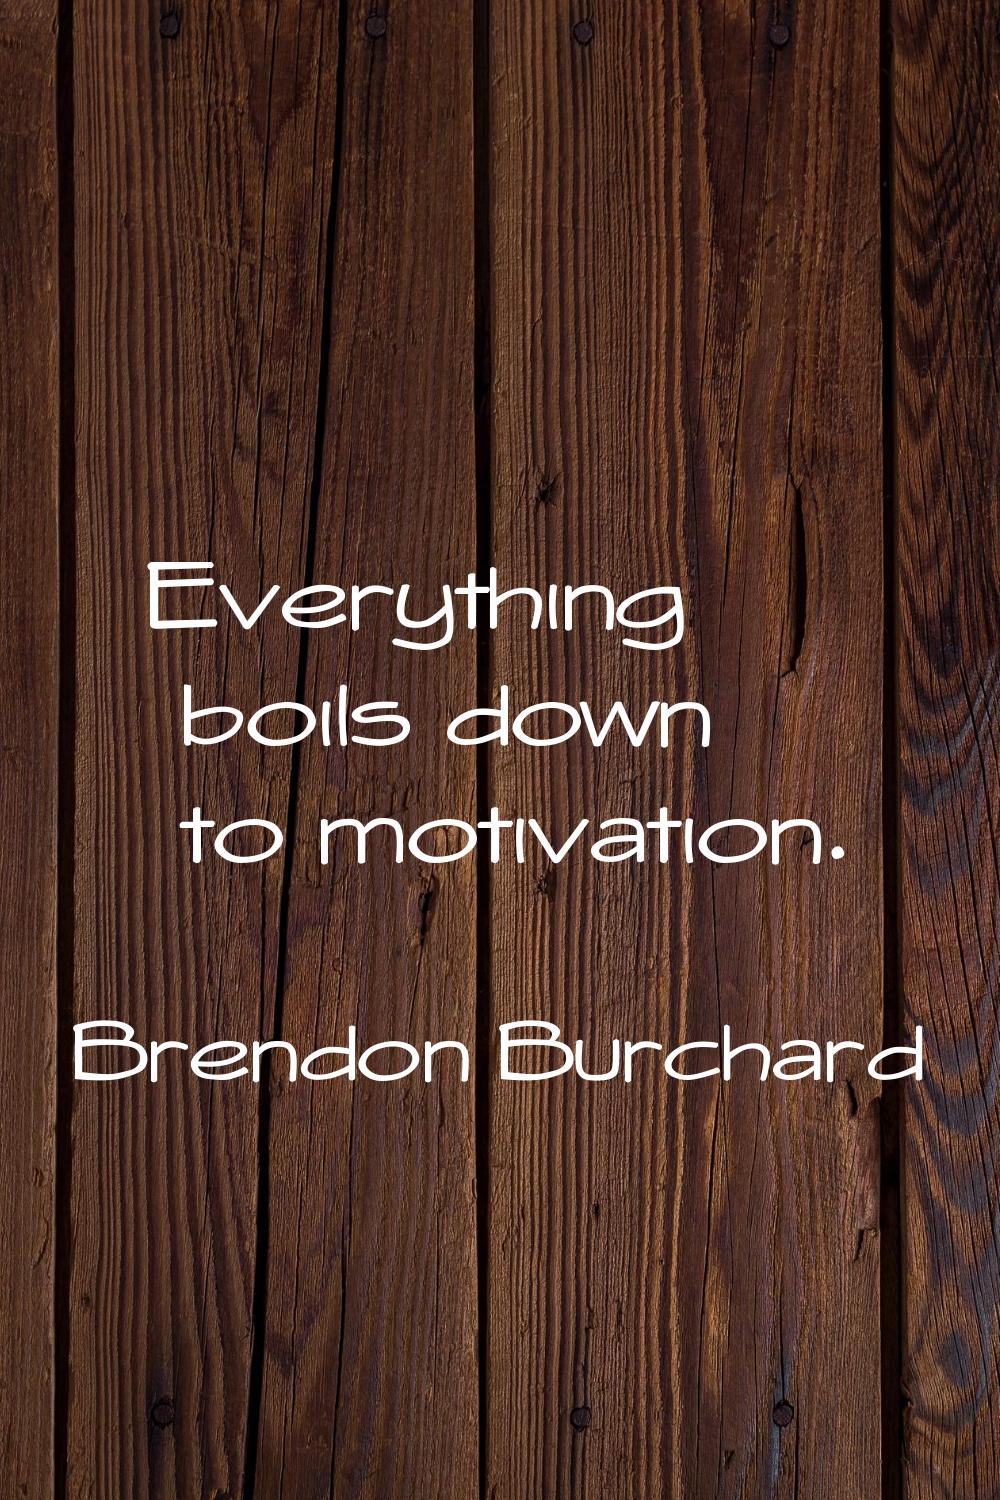 Everything boils down to motivation.